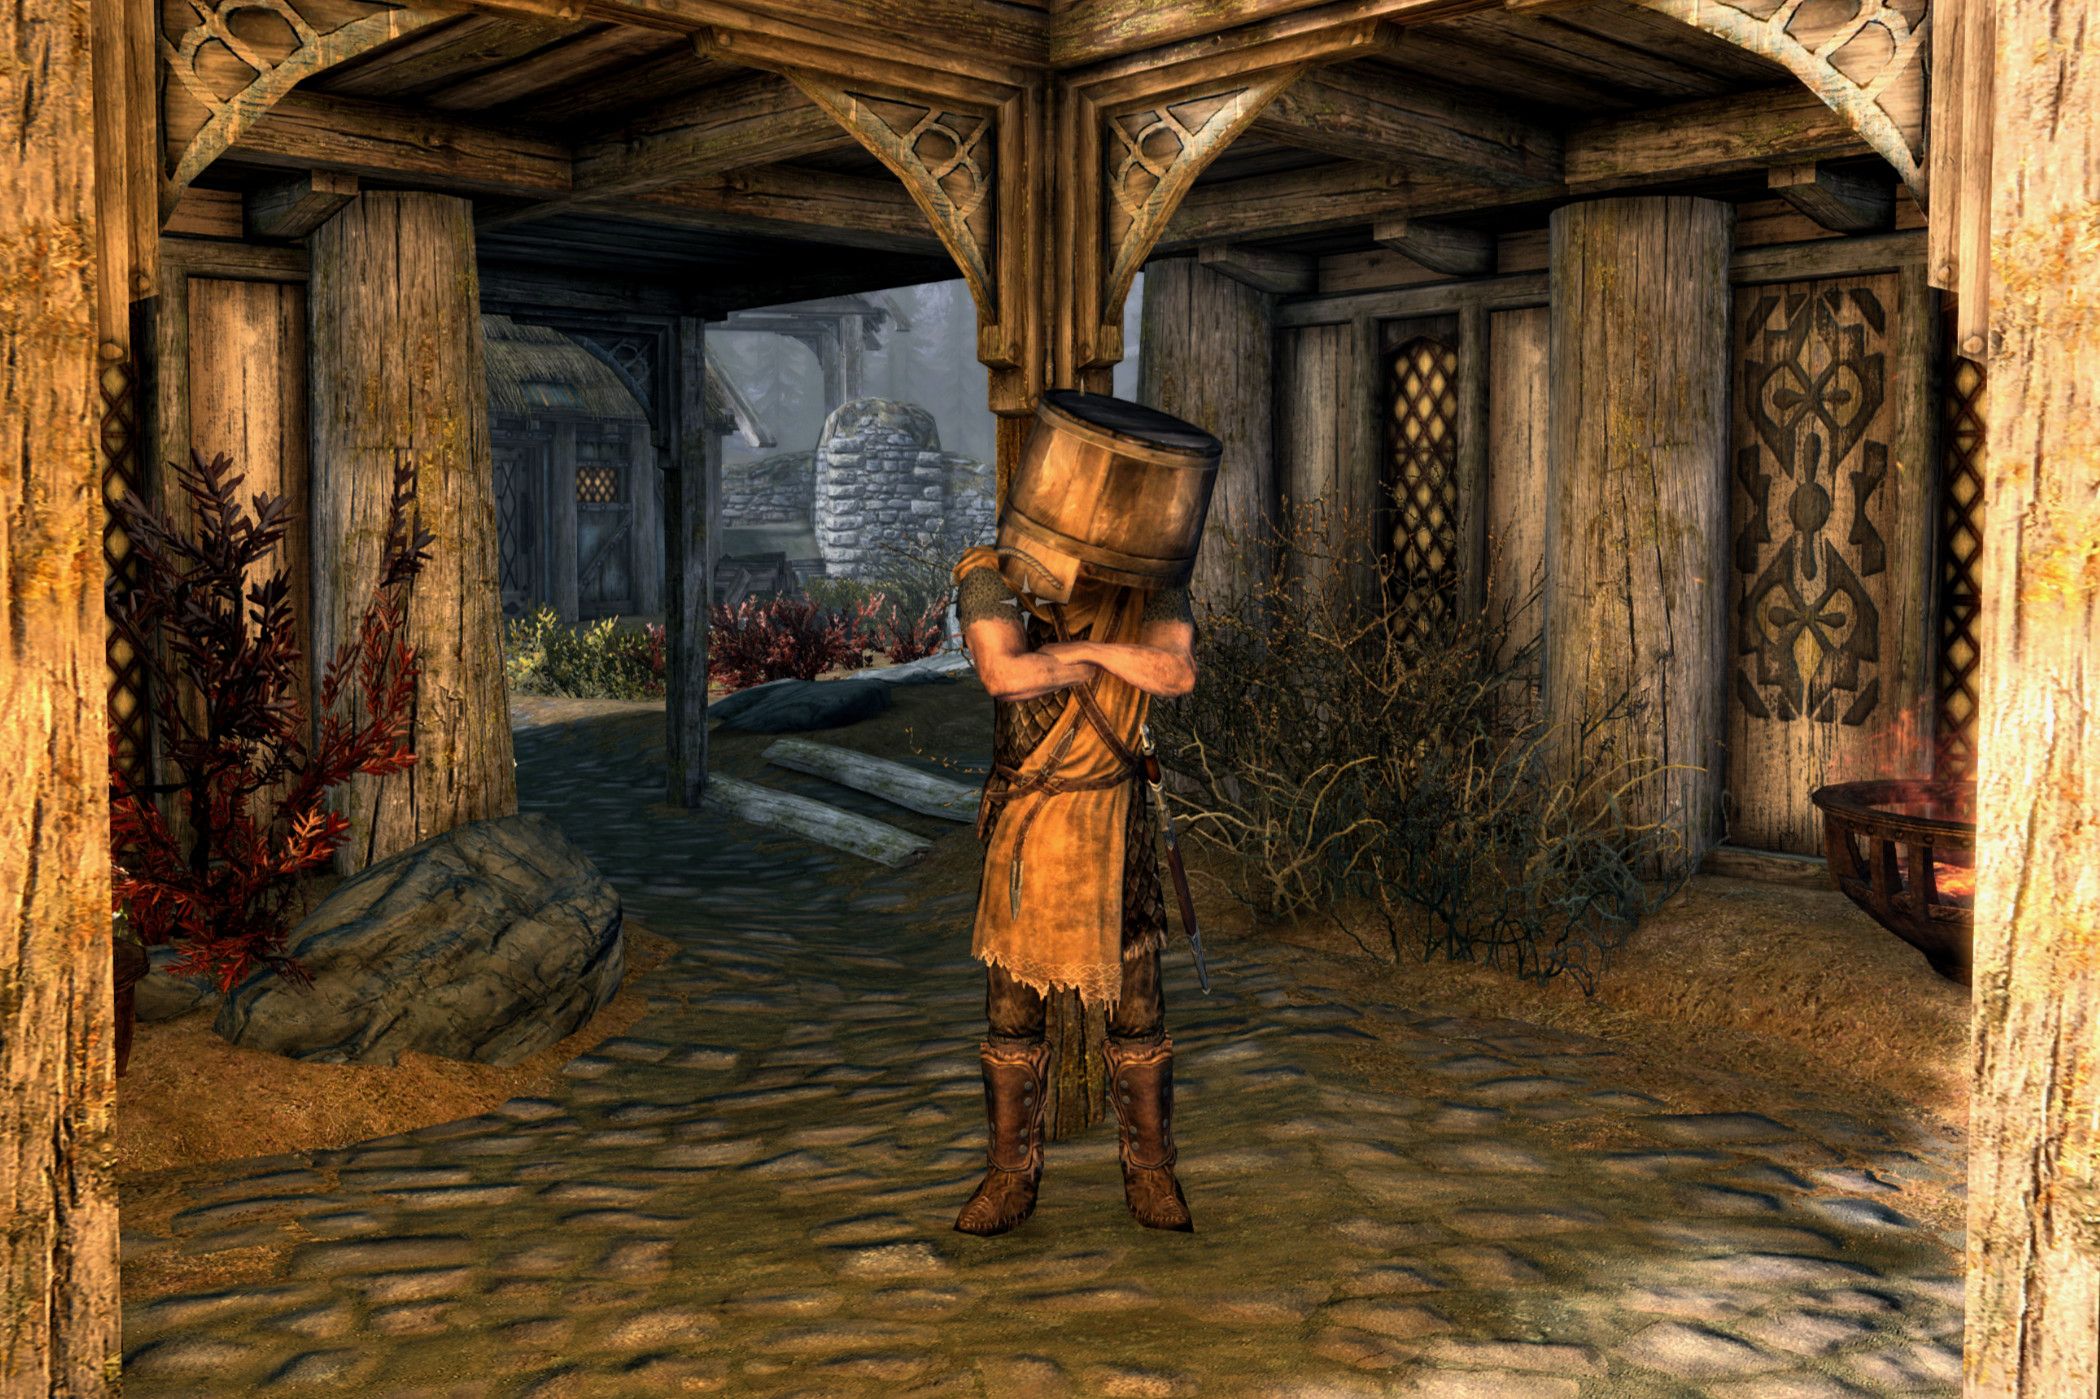 Skyrim's Whiterun guard with a bucket on his head.